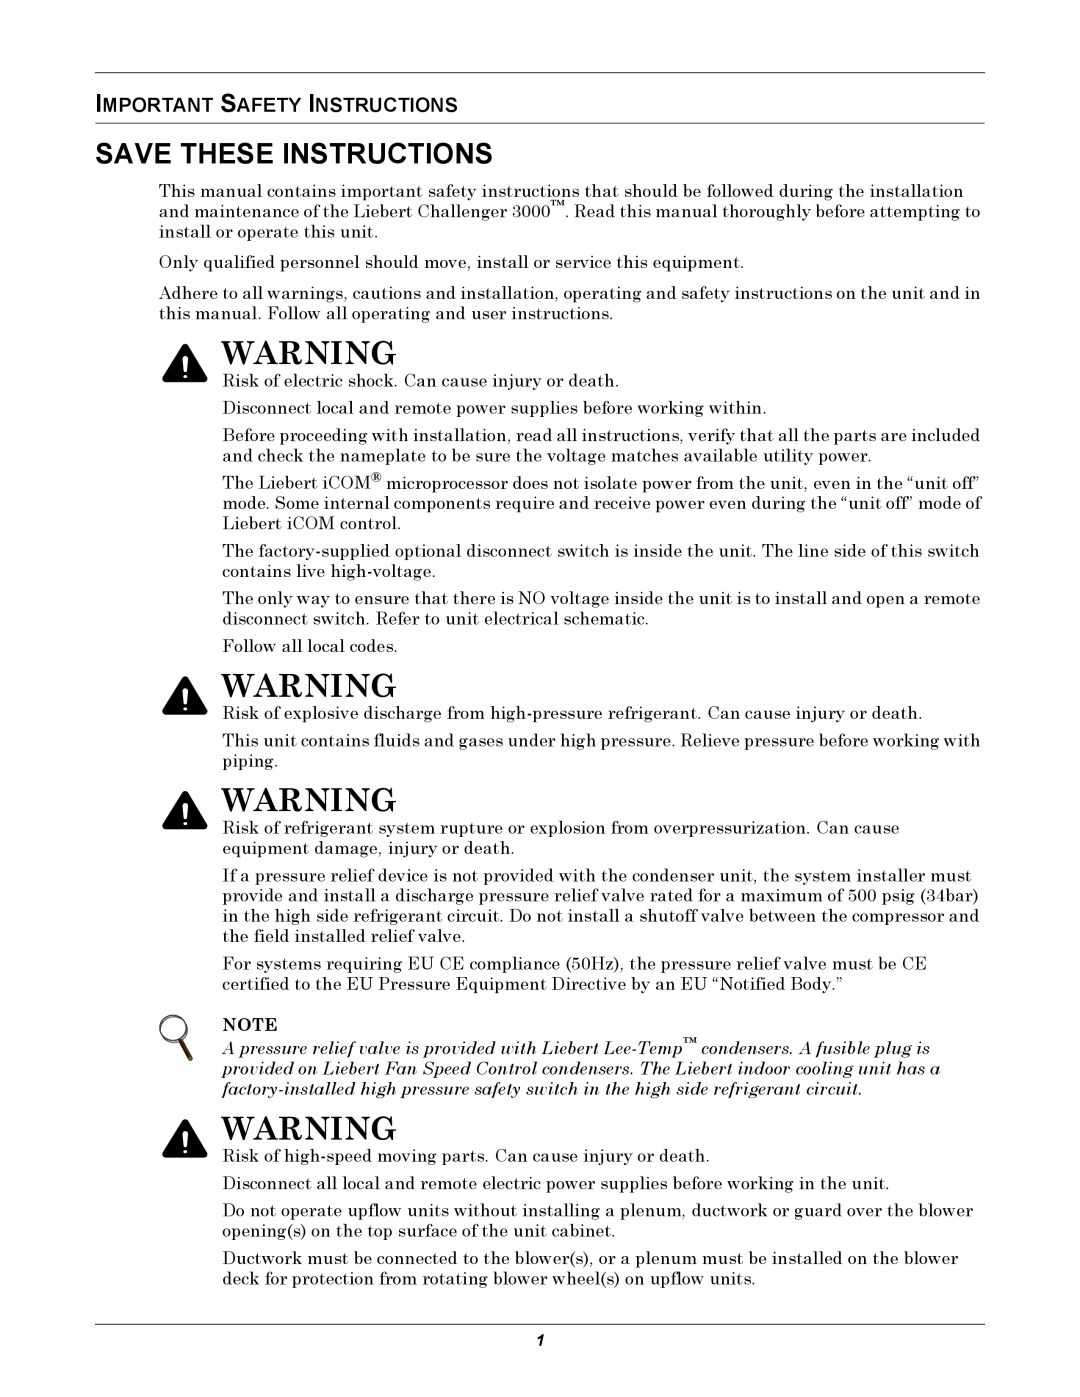 Emerson 3000 installation manual Save These Instructions, Important Safety Instructions 